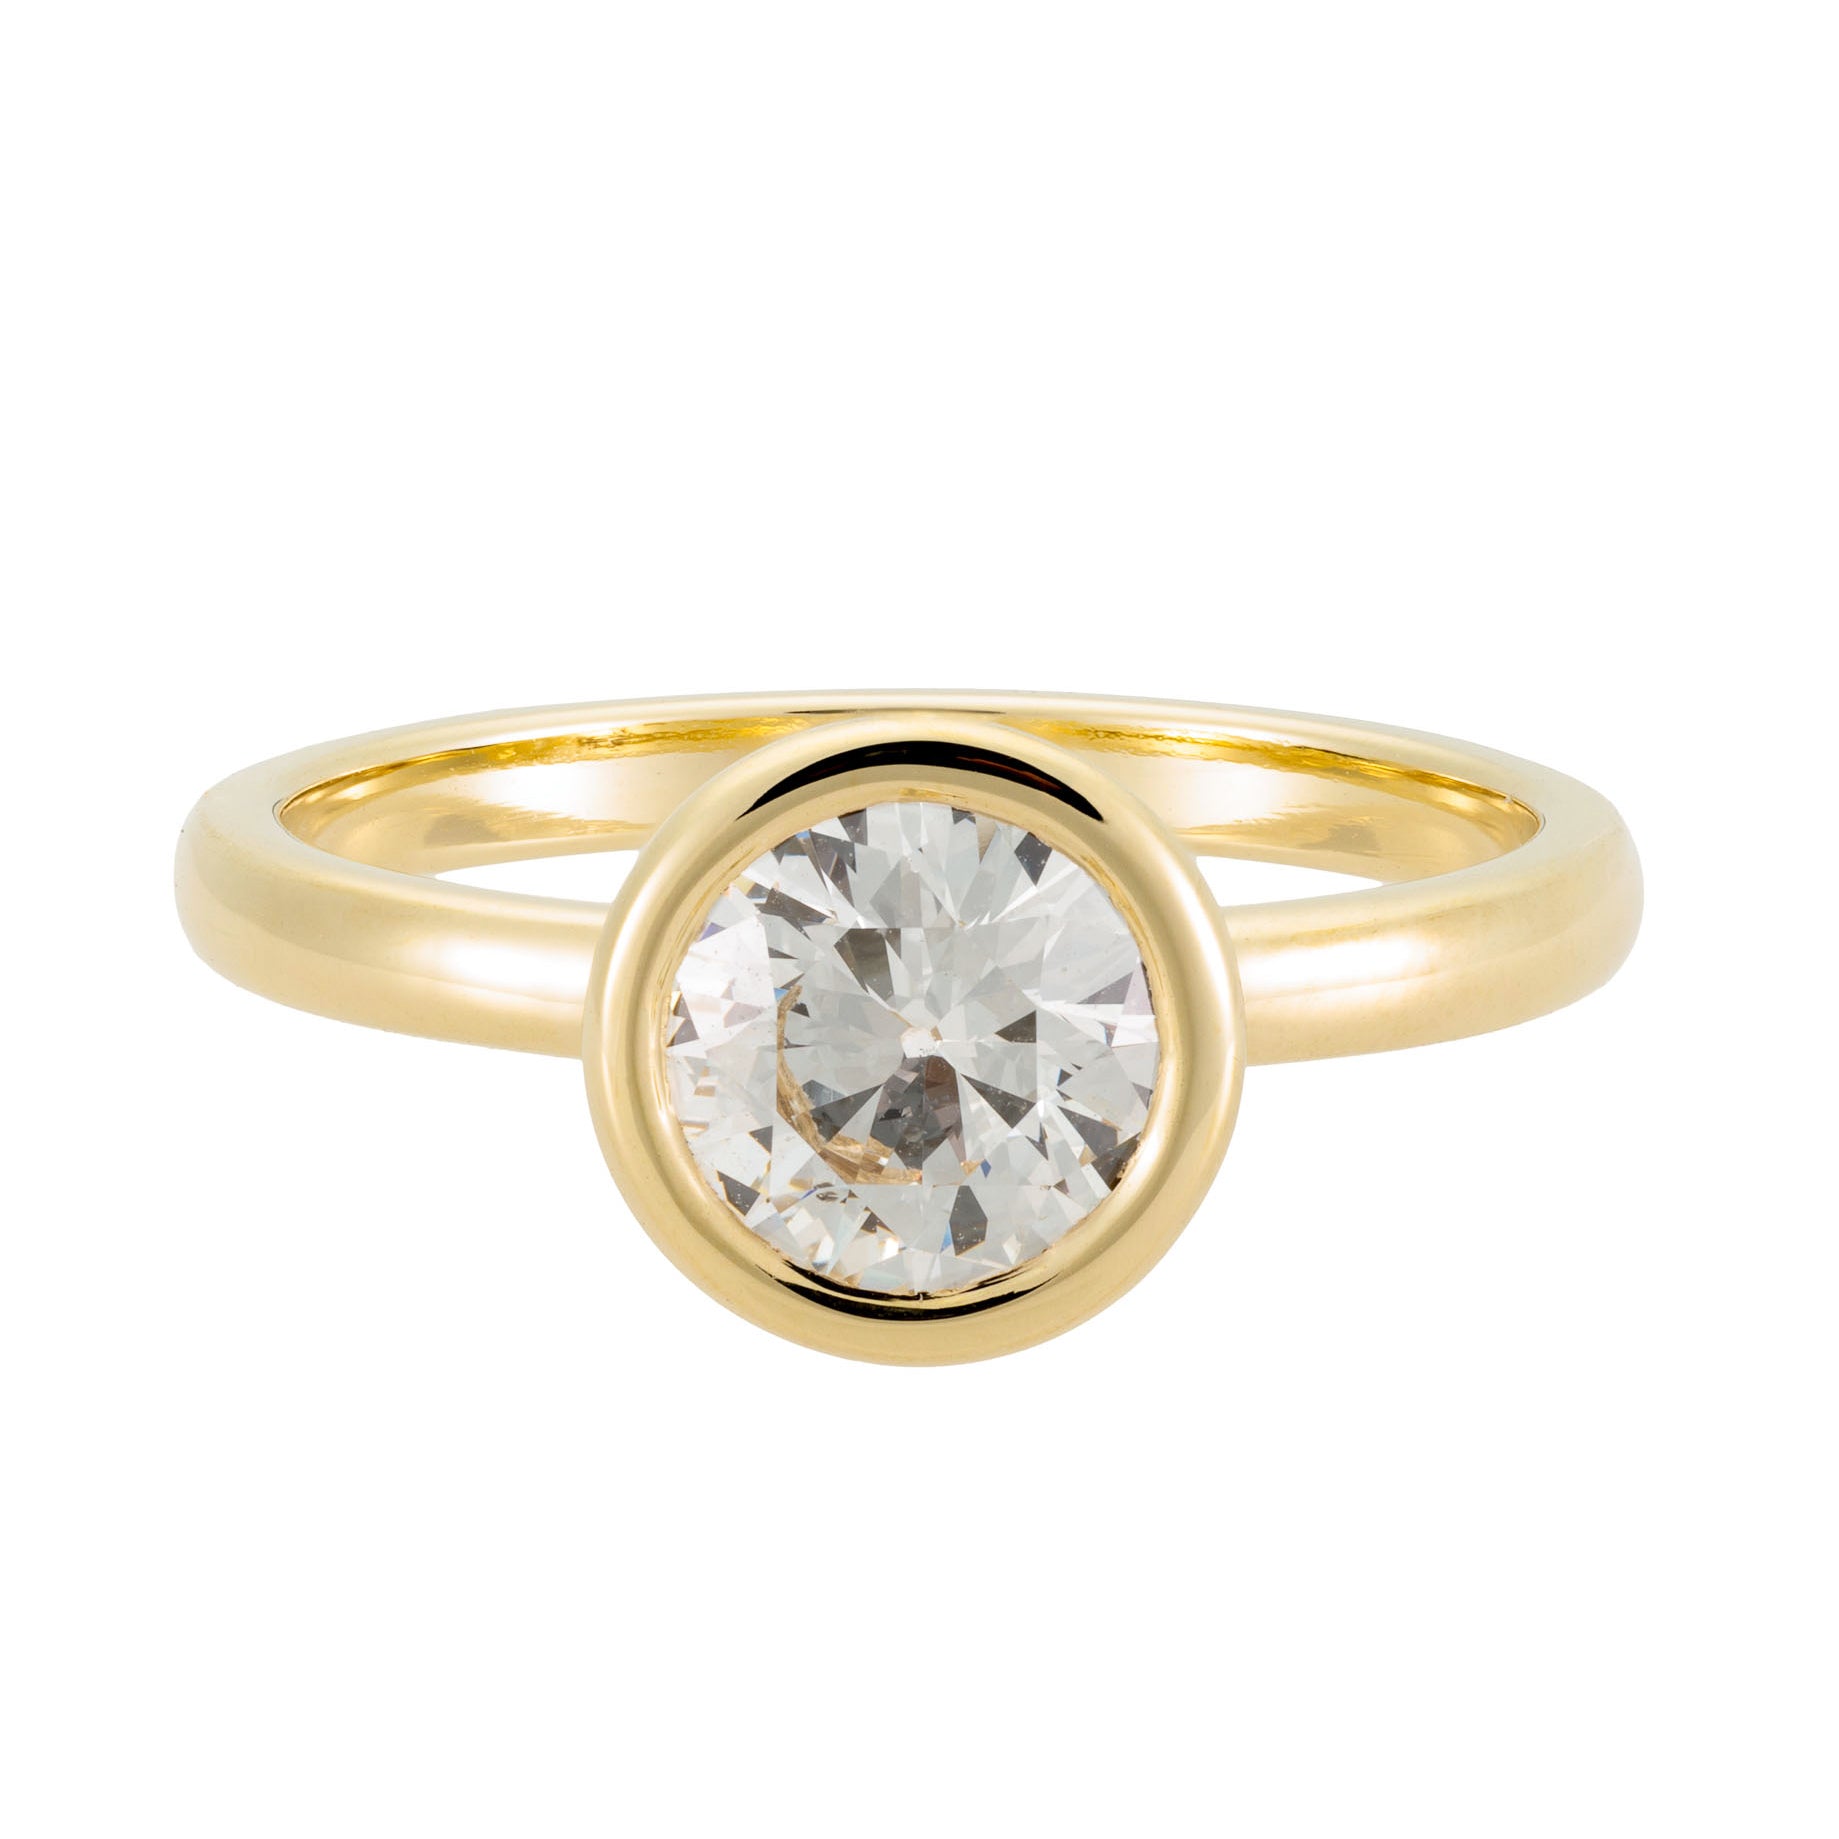 yellow gold solitaire diamond ring